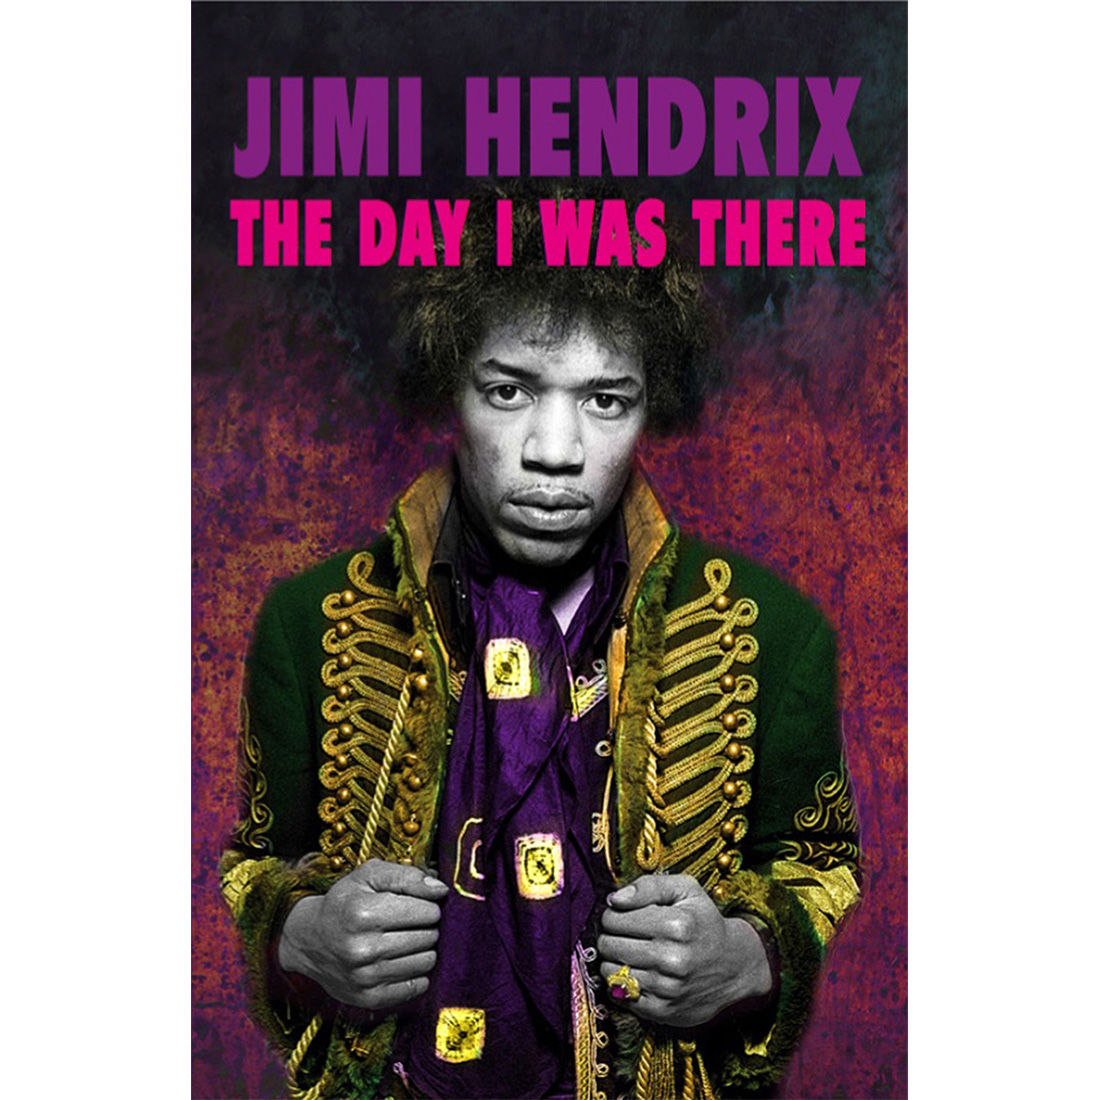 This Day In Music - Jimi Hendrix - The Day I Was There: Paperback Edition Book